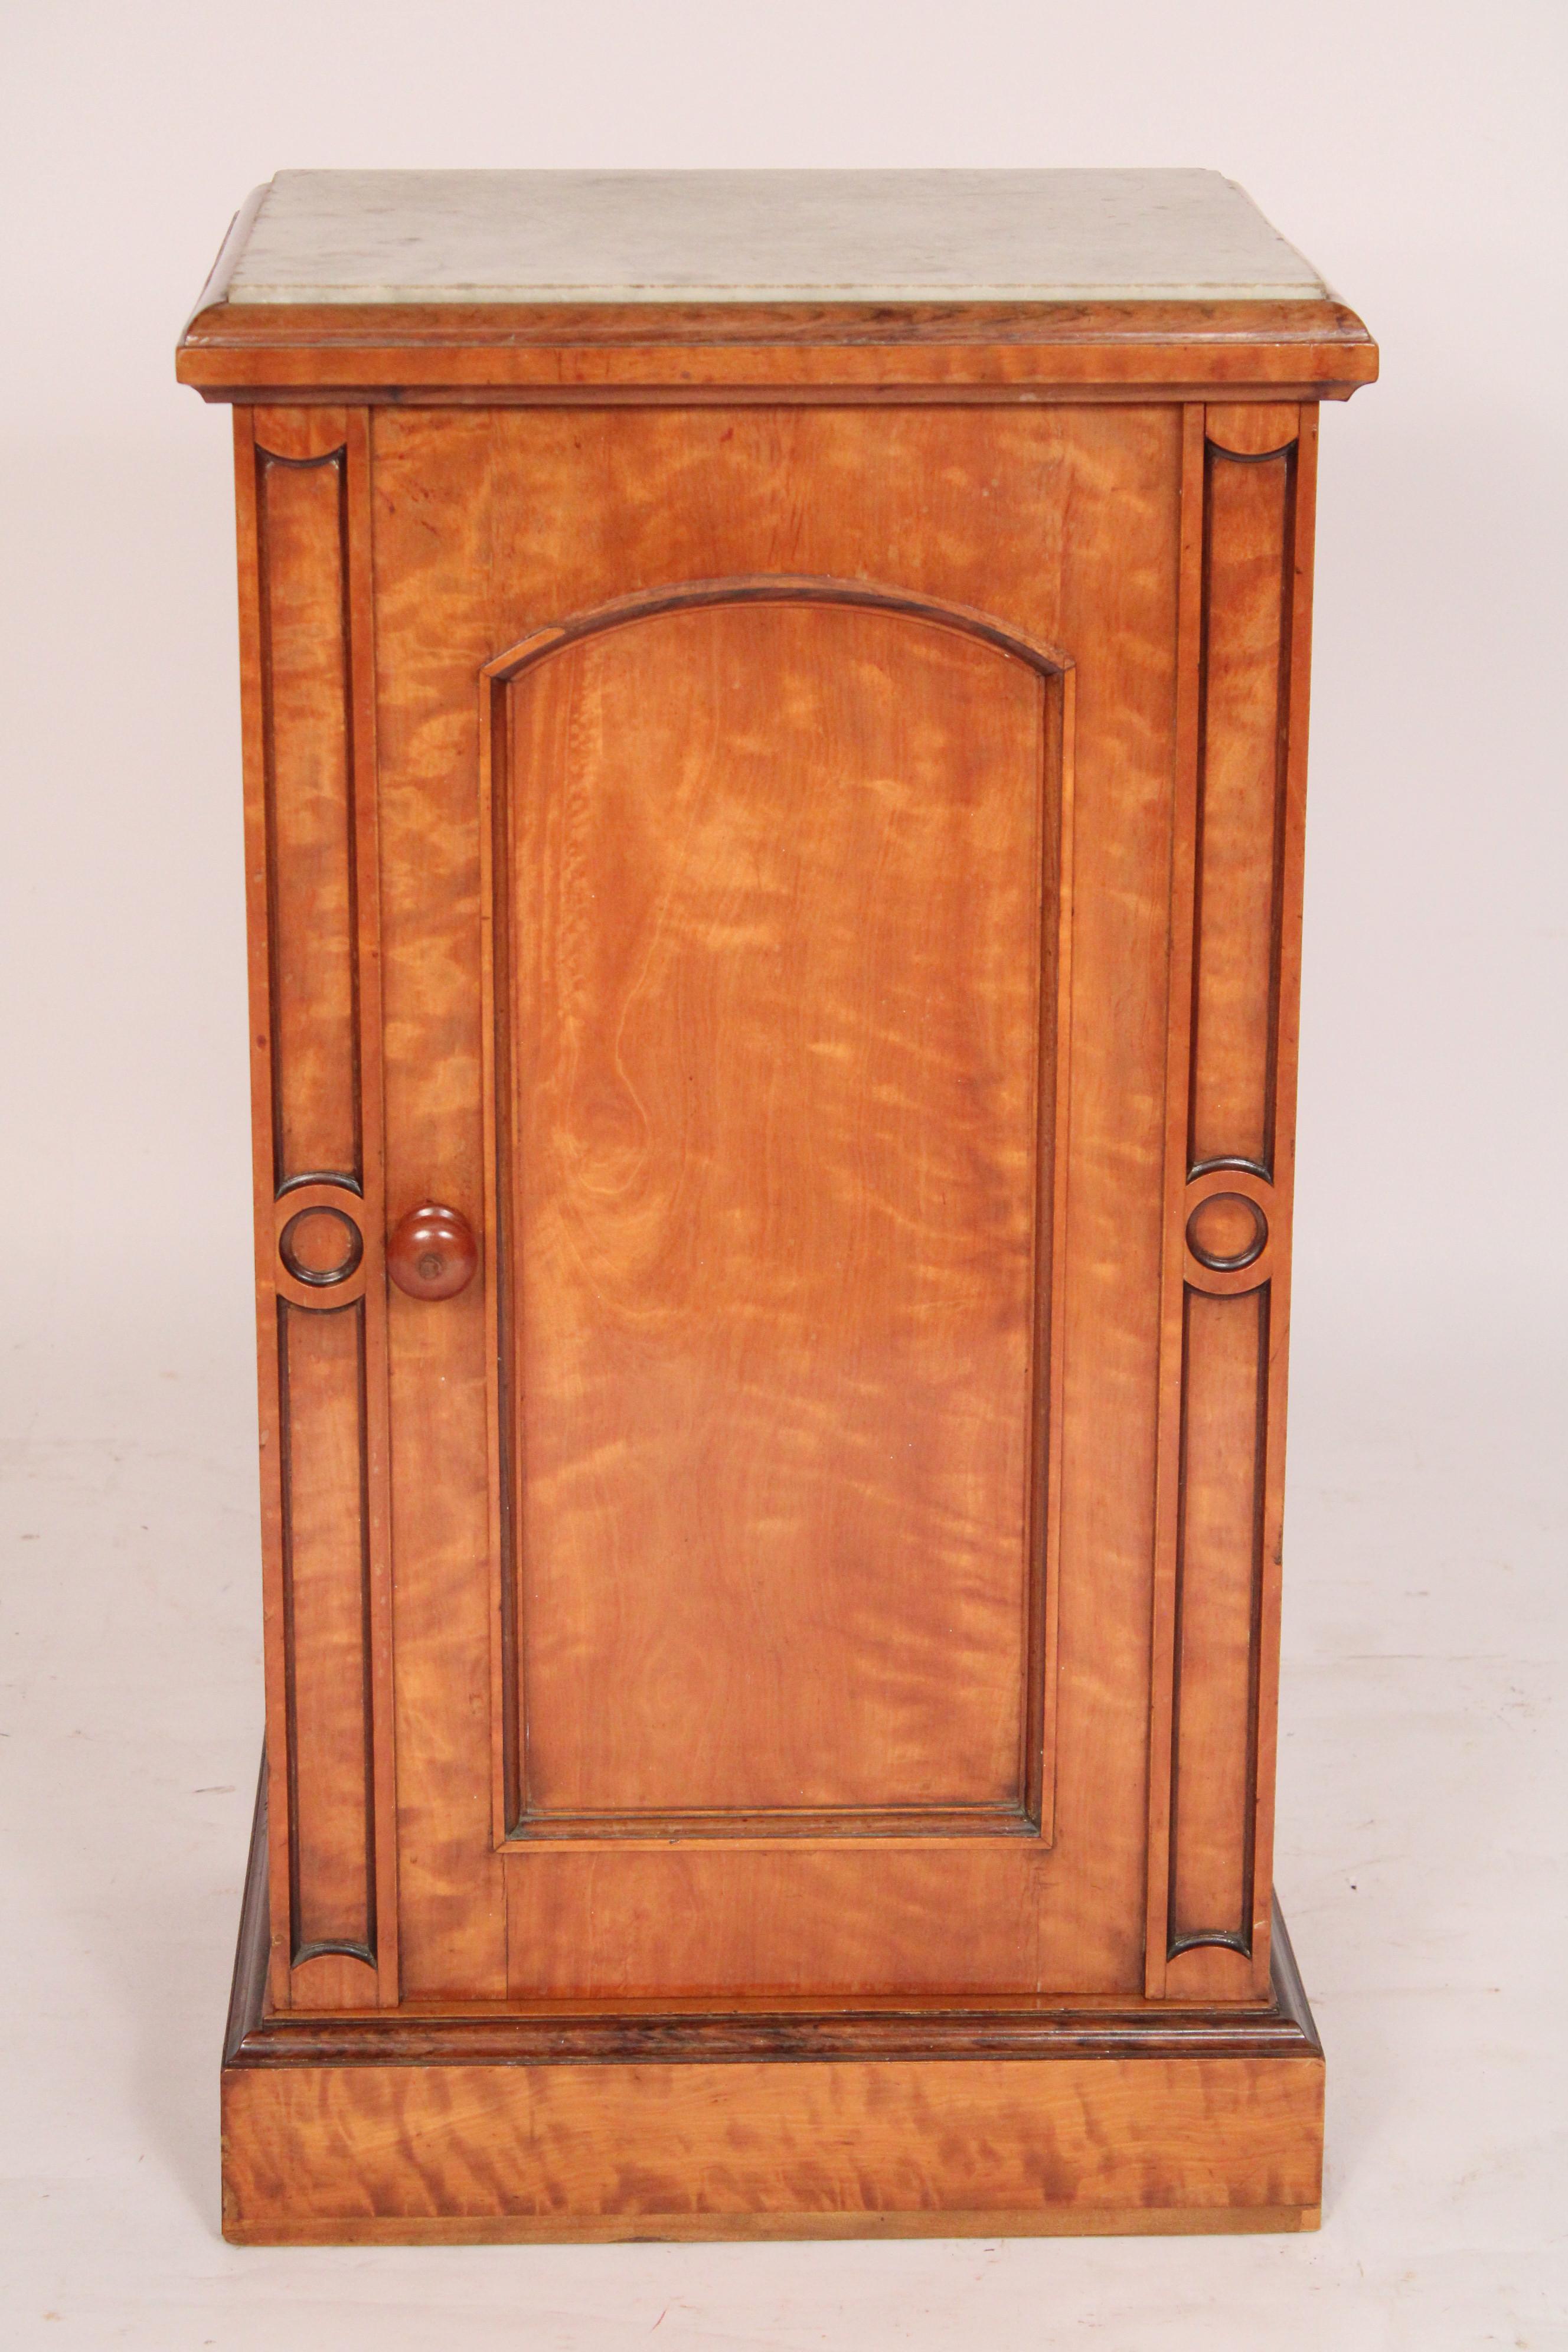 Napoleon III birch cabinet with marble top, circa 1880's. With a white marble top, molded top edges, a single arched door with a wood knob, resting on a plinth base. The birch with nice feathering.